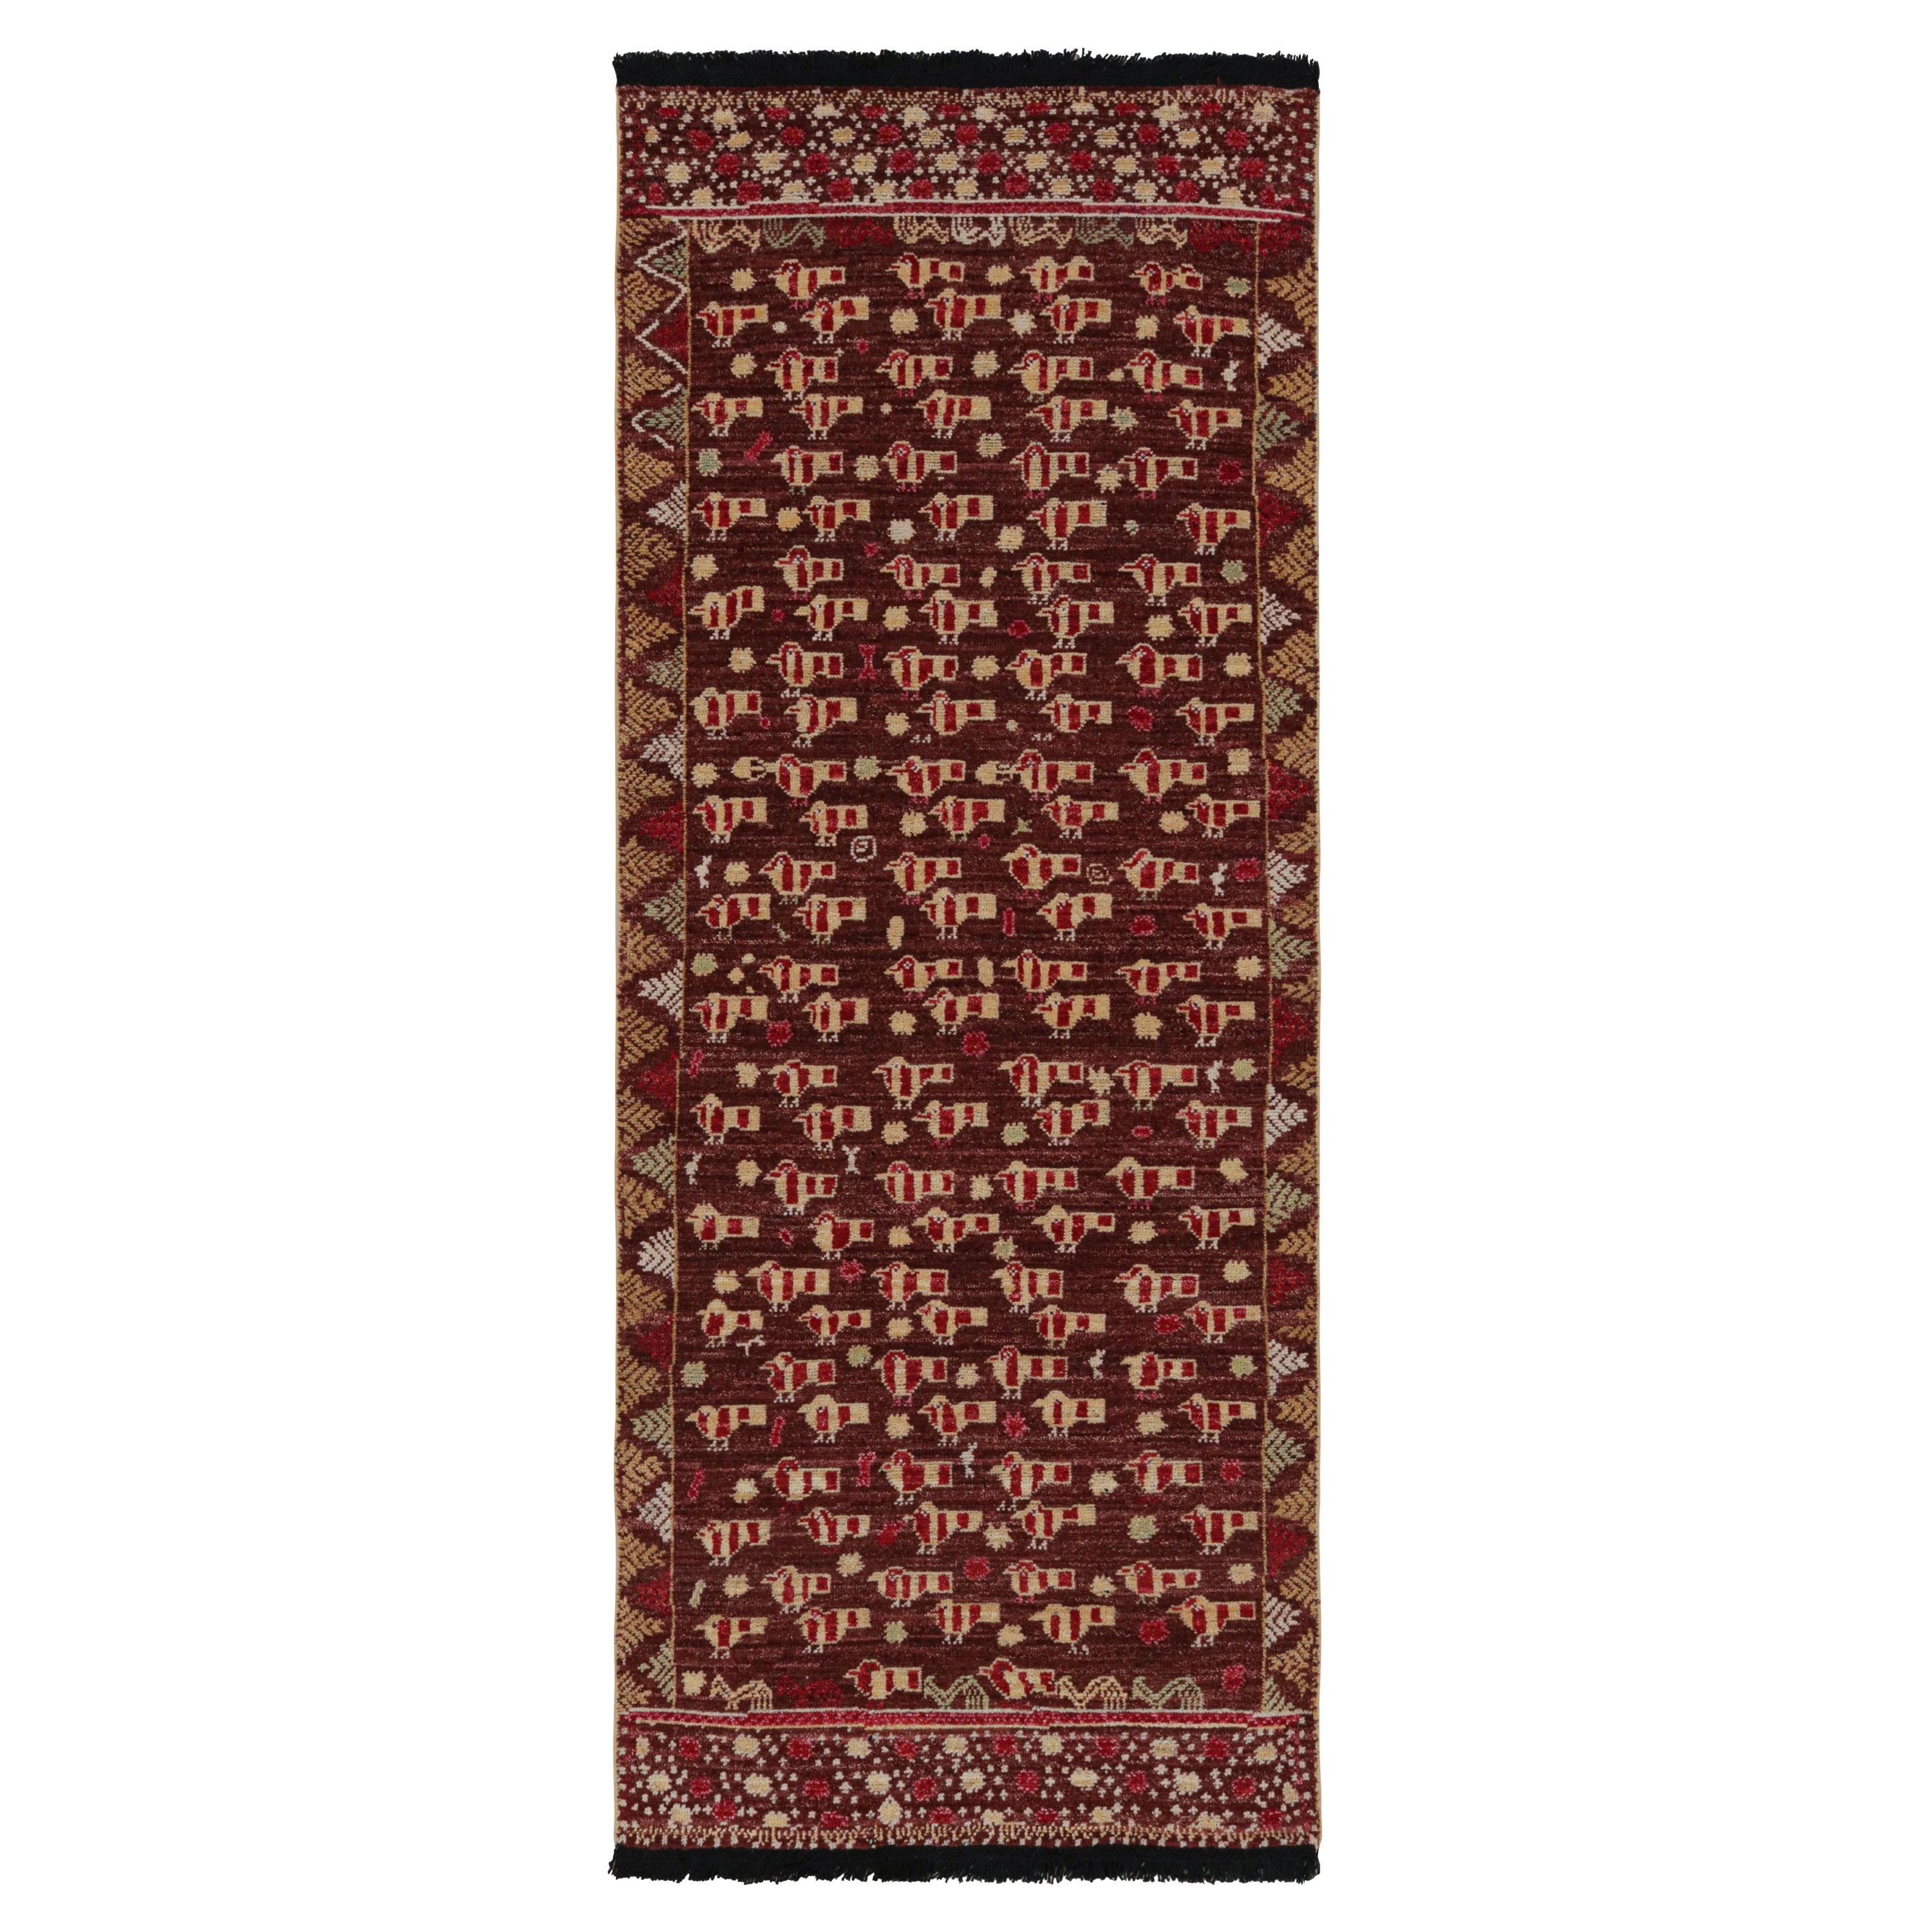 Rug & Kilim’s Tribal Style Runner Rug in Red and Gold Geometric Patterns